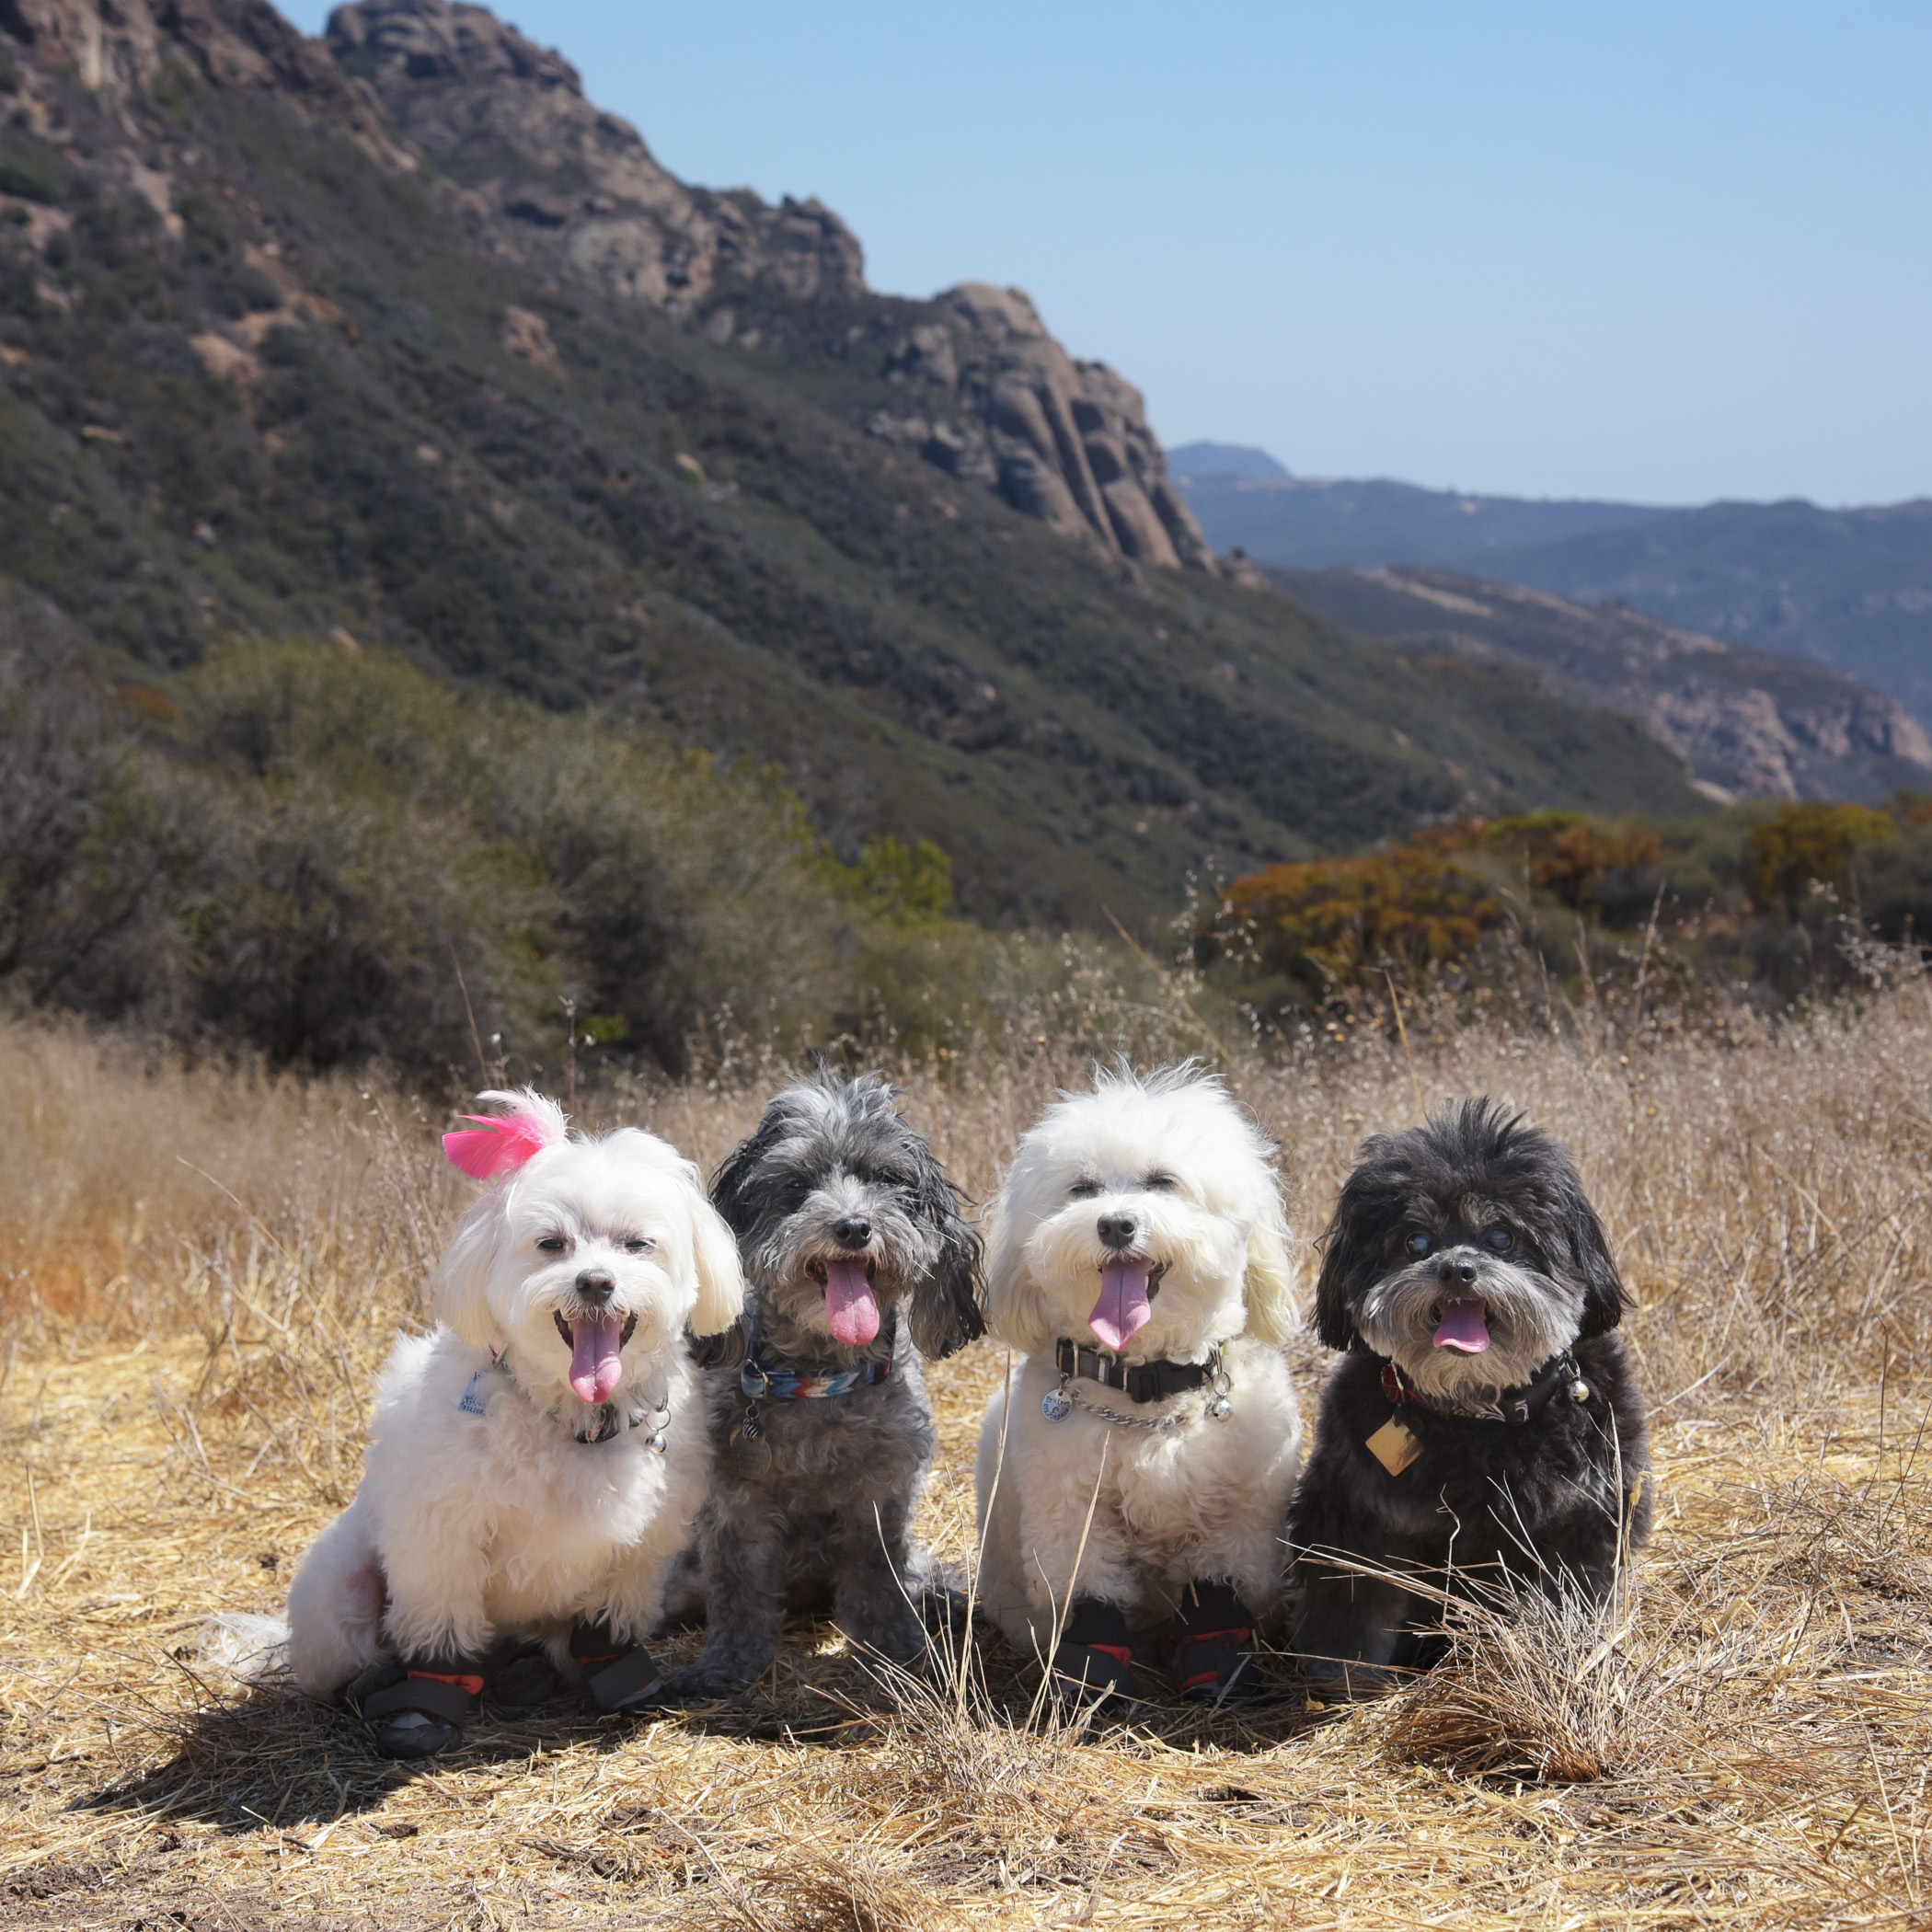  We tried to go for a hike in the Santa Monica Mountains, but it turned out to be way too hot. We went a short distance and both Mommy &amp; Daddy said nope, this is too much for you guys. (Personally, we just think they’re weanies and weren’t up for